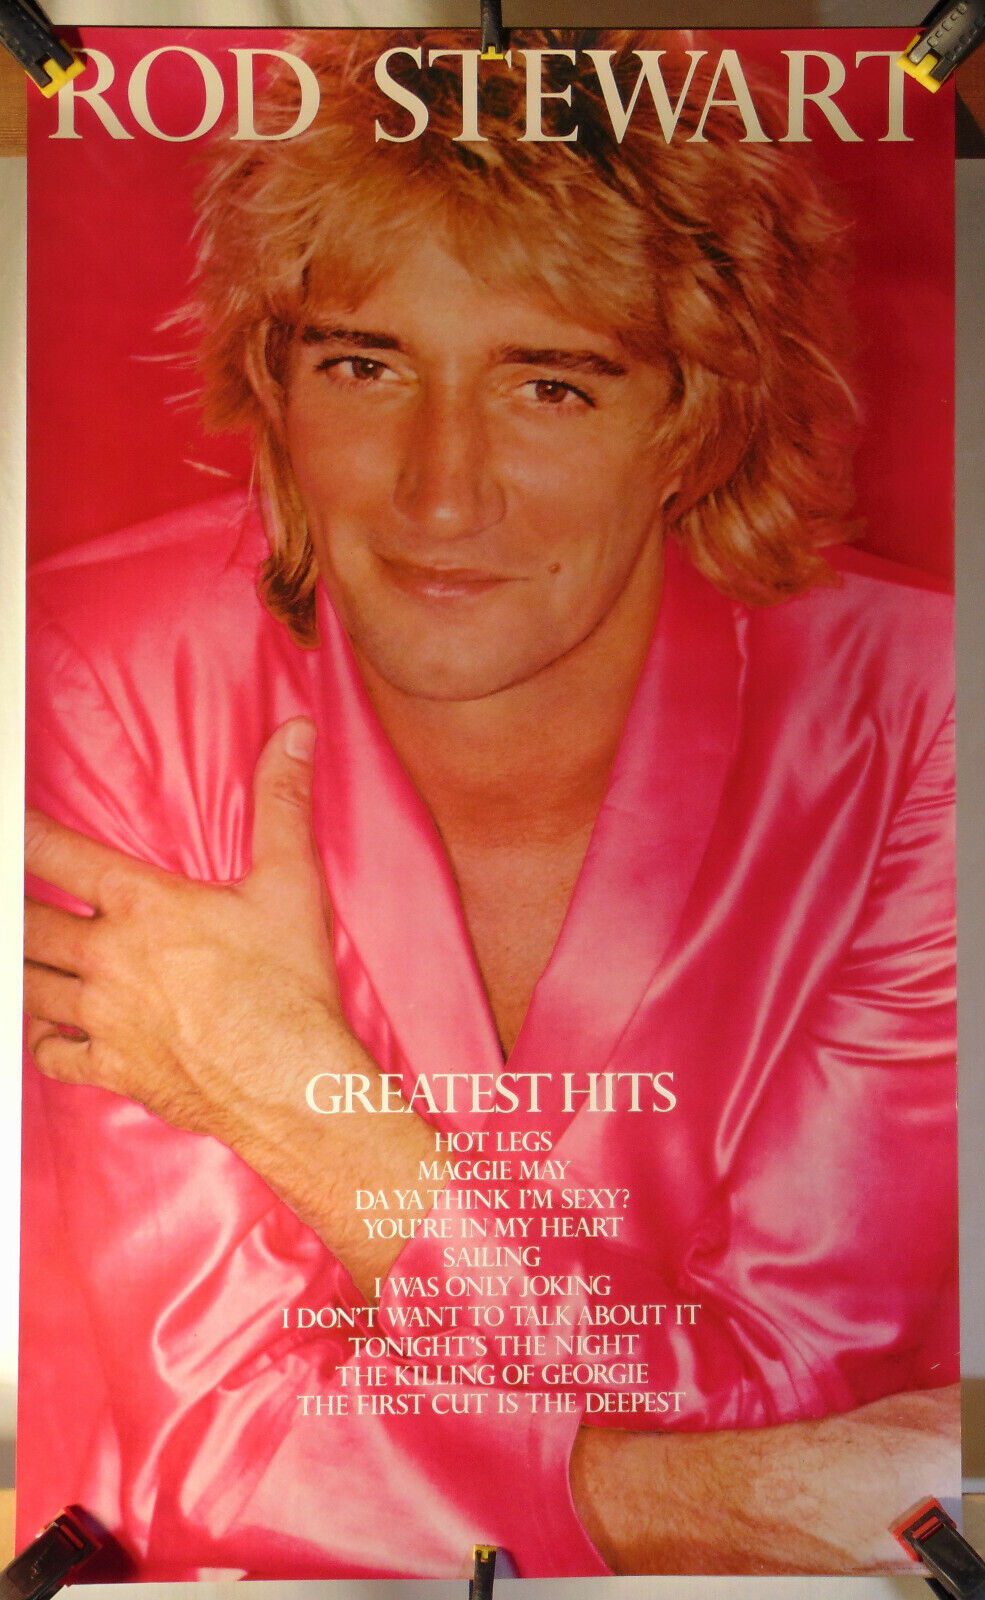 ROD STEWART--Greatest Hits--Promo Poster